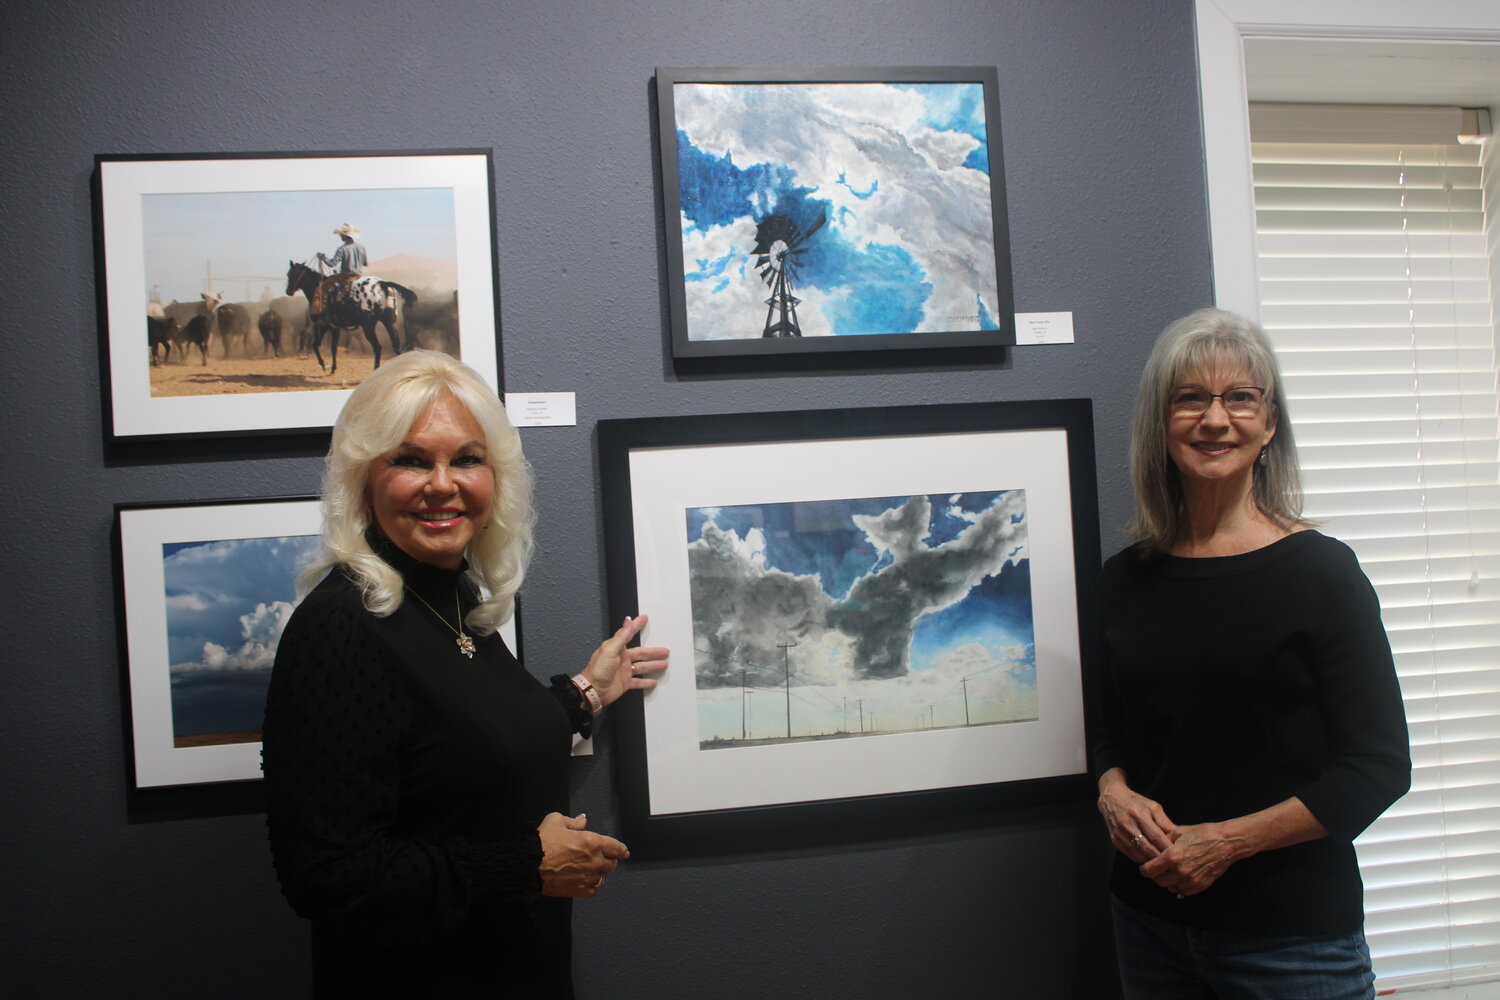 Vickie Guthrie, and Dawn Milson study the different art pieces on display at the Shanley House Gallery that showcase Texas at its finest.